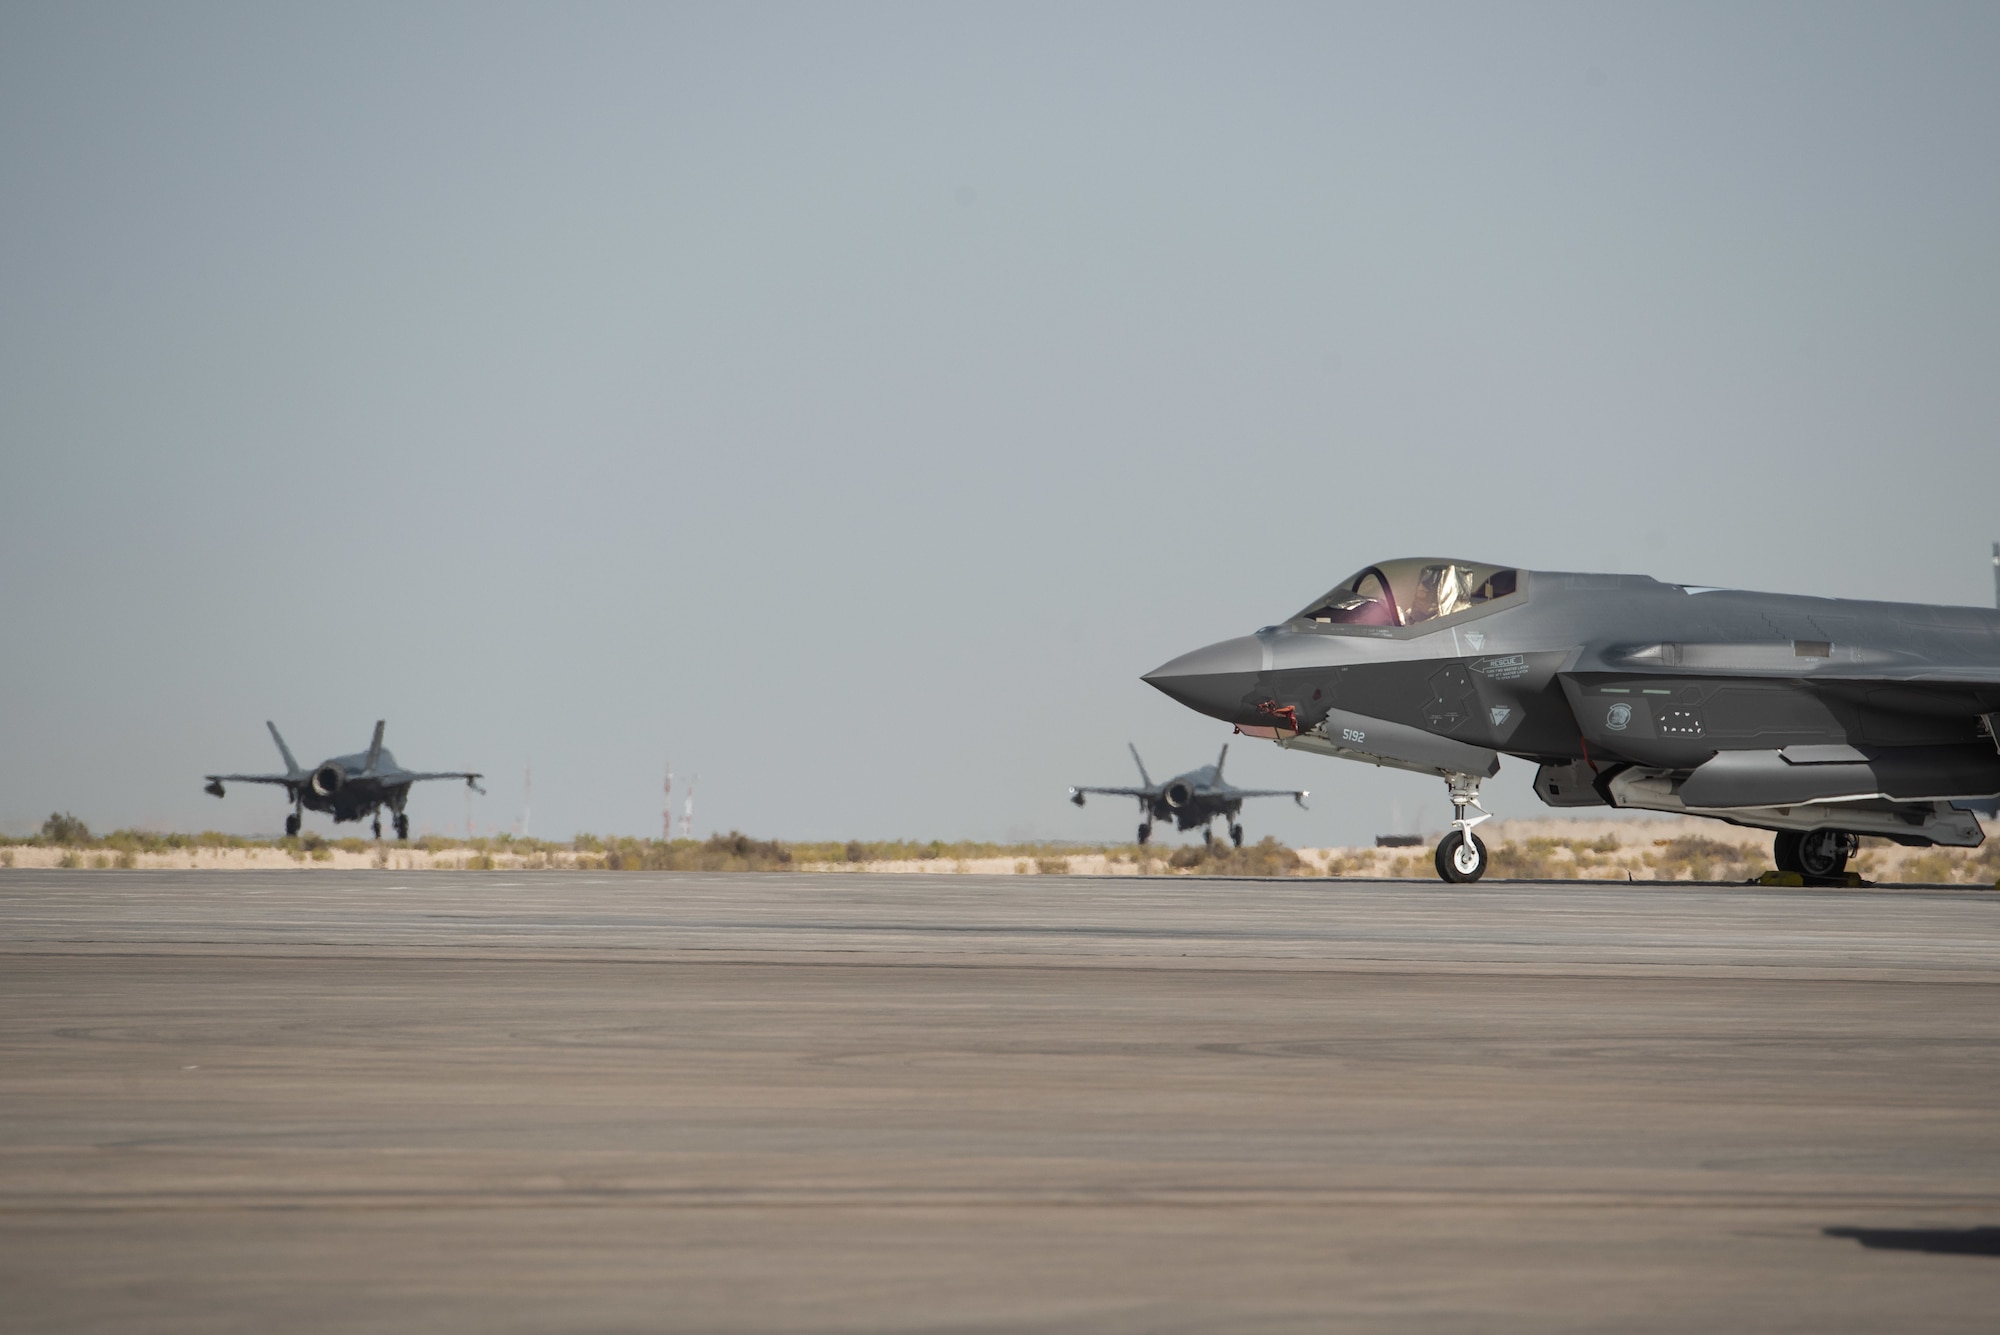 Two F-35A Lightning IIs, assigned to the 4th Expeditionary Fighter Squadron, taxi to the runway June 6, 2019, at Al Dhafra Air Base, United Arab Emirates.